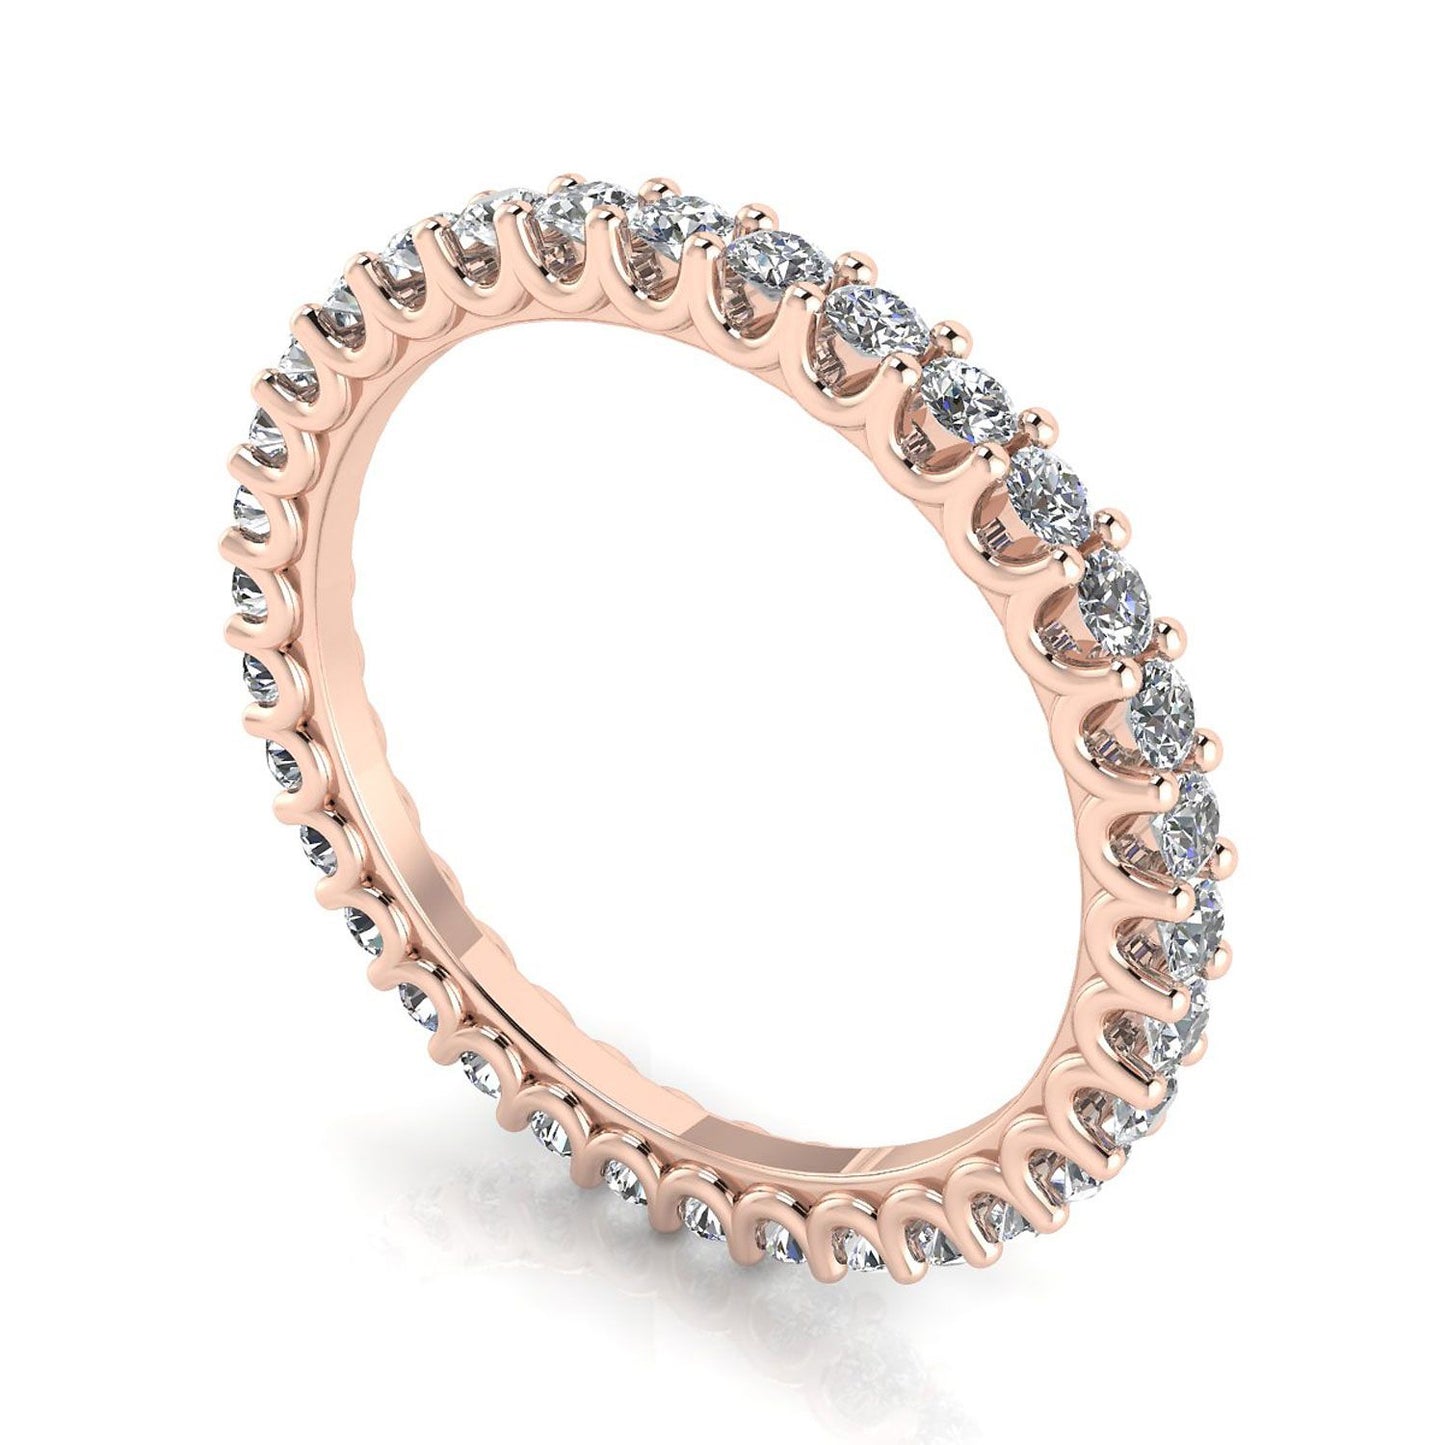 Round Brilliant Cut Diamond Shared Prong Set Eternity Ring In 14k Rose Gold  (1.56ct. Tw.) Ring Size 7.5